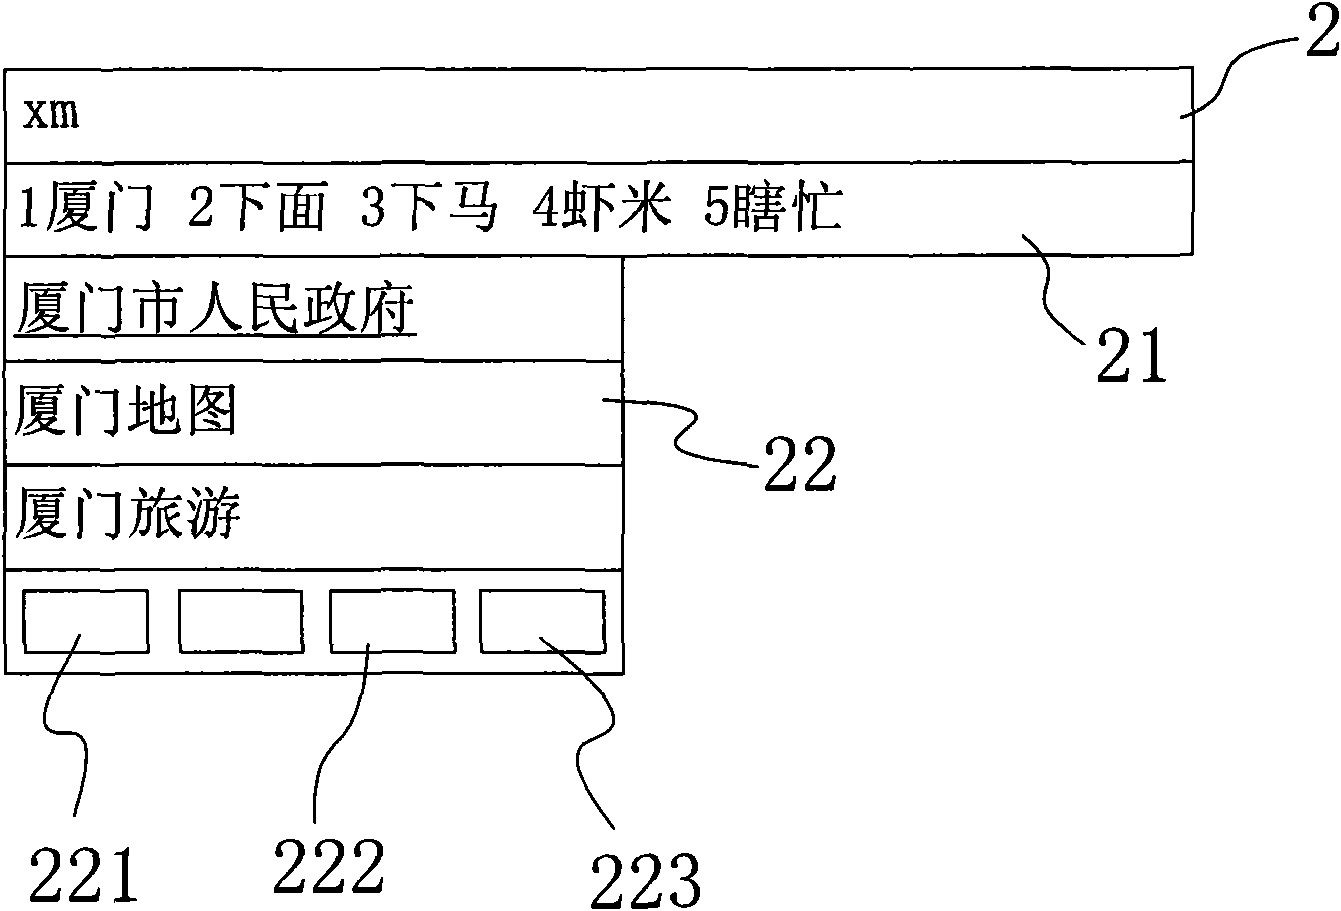 Advertising display device integrated in input method